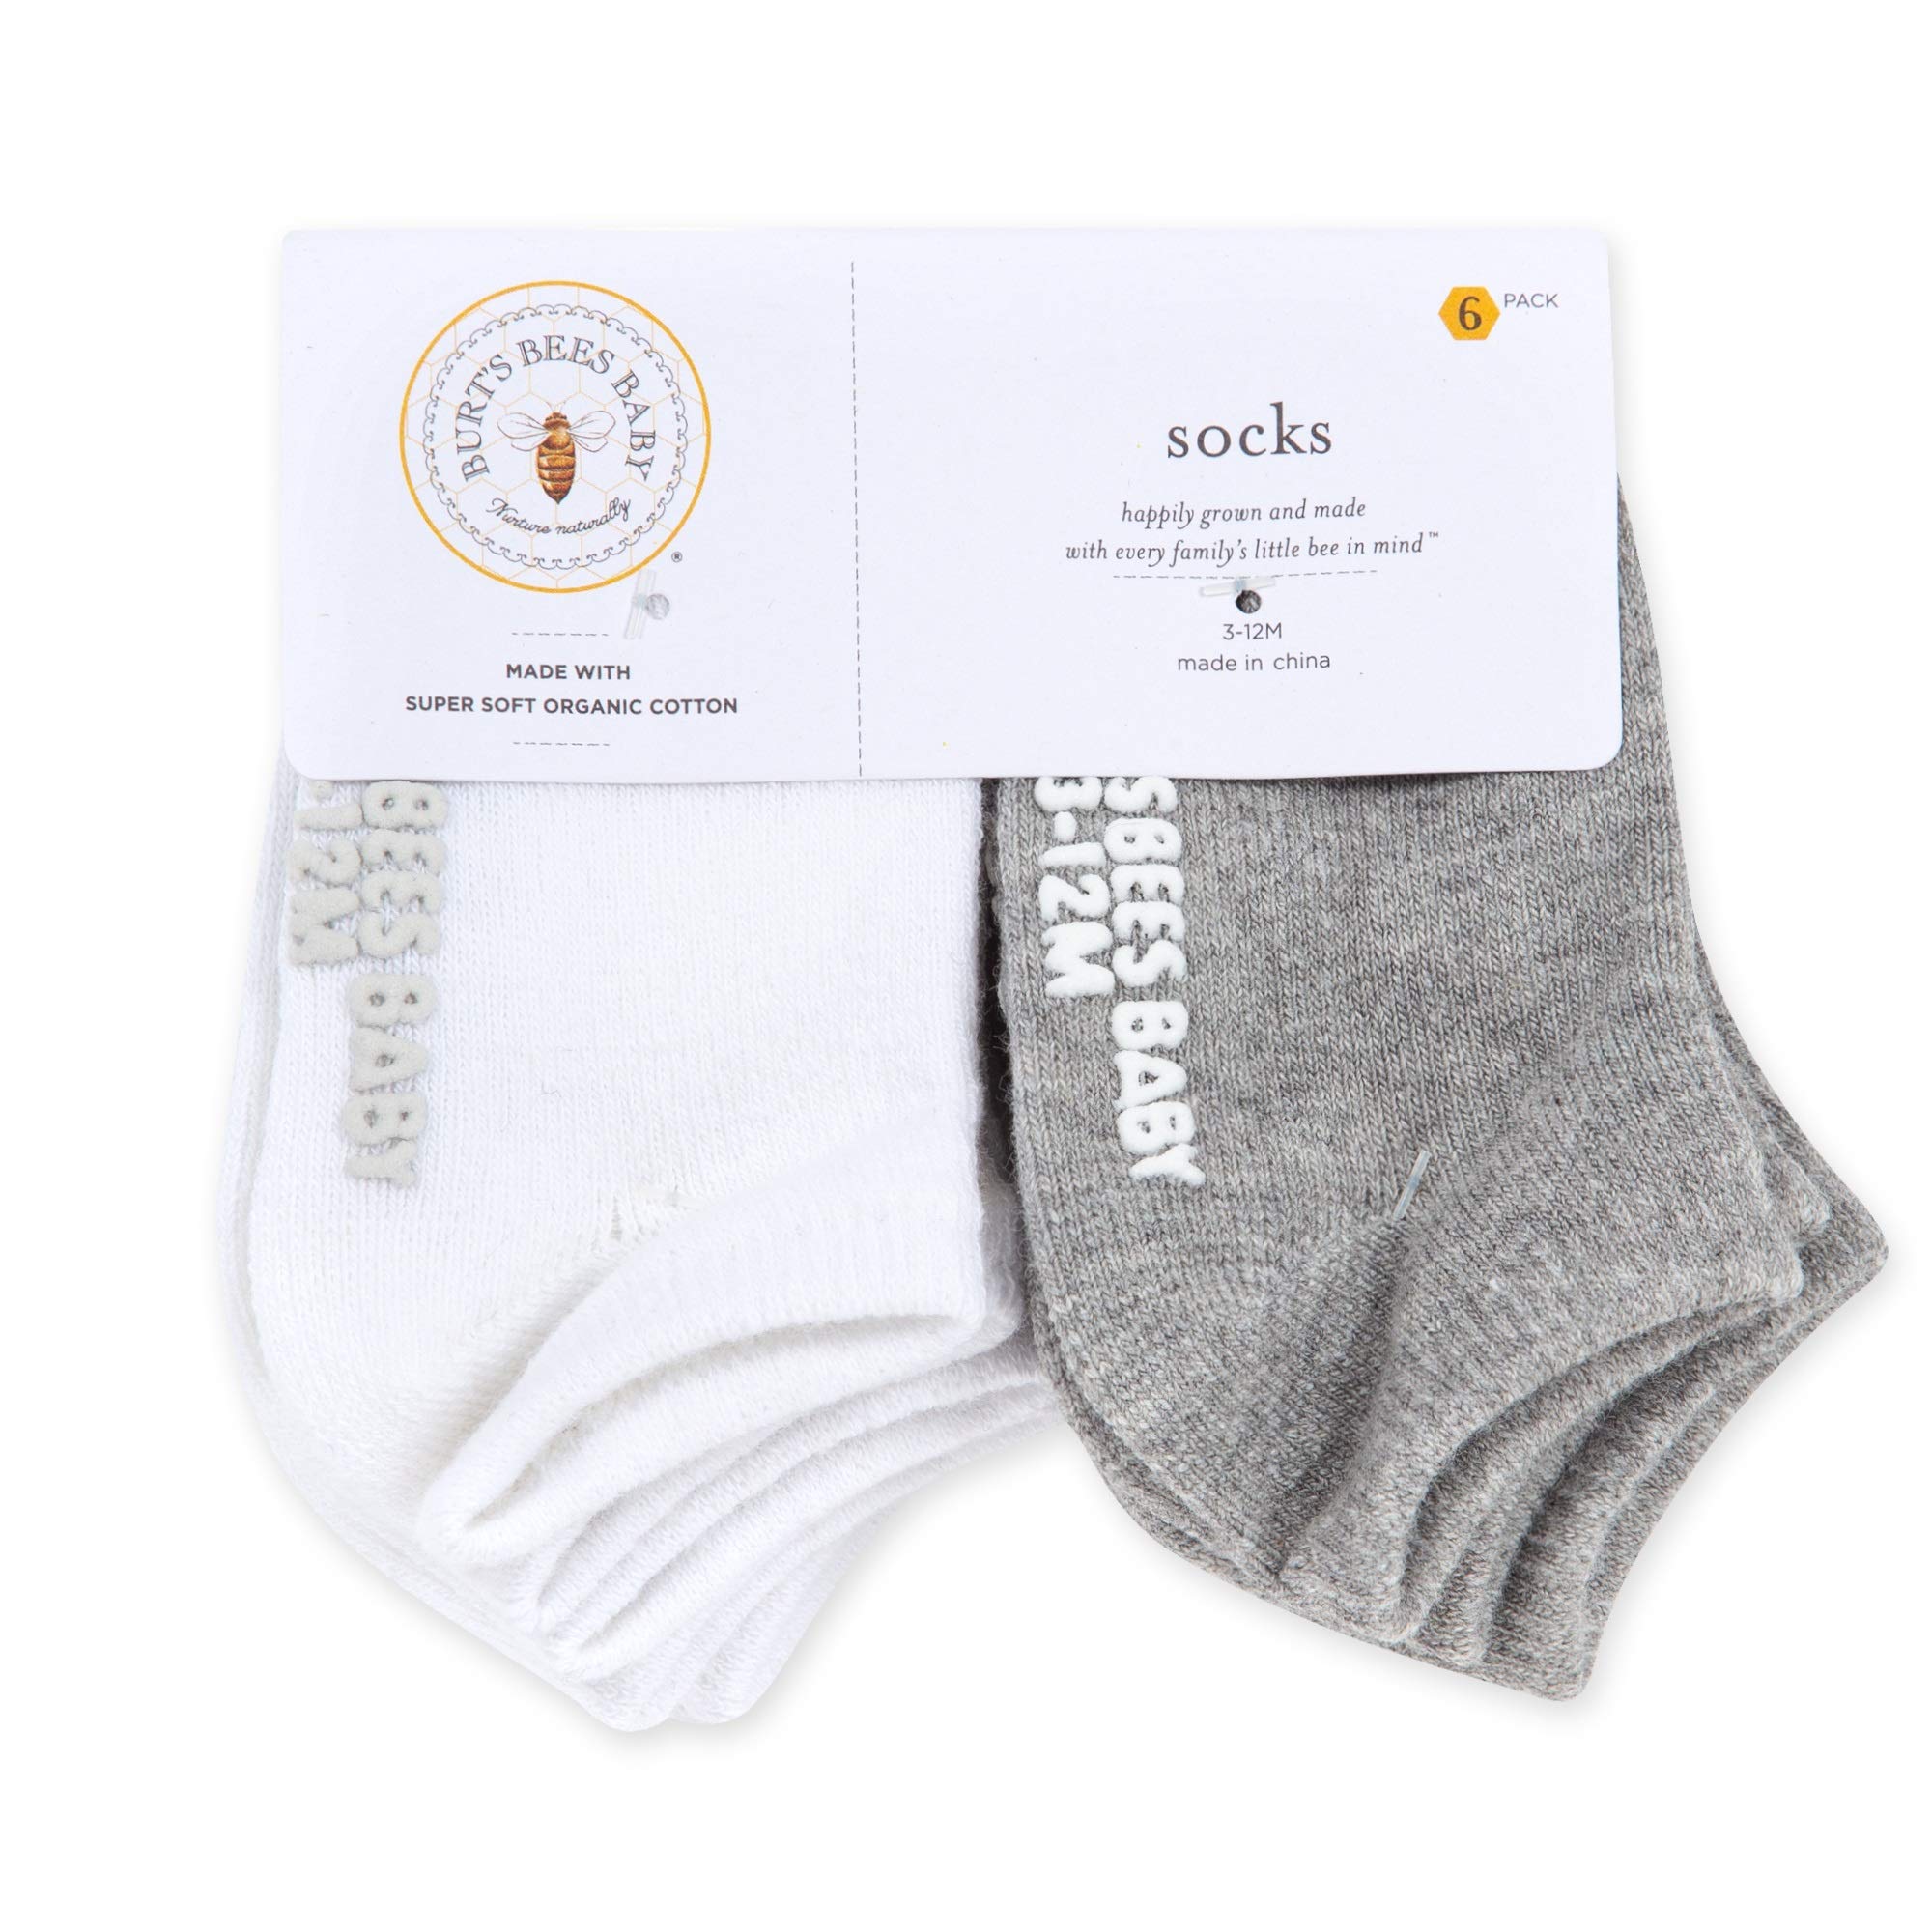 Burt's Bees Baby unisex-baby Socks, 6-pack Ankle Or Crew With Non-slip Grips, Made With Organic Cotton